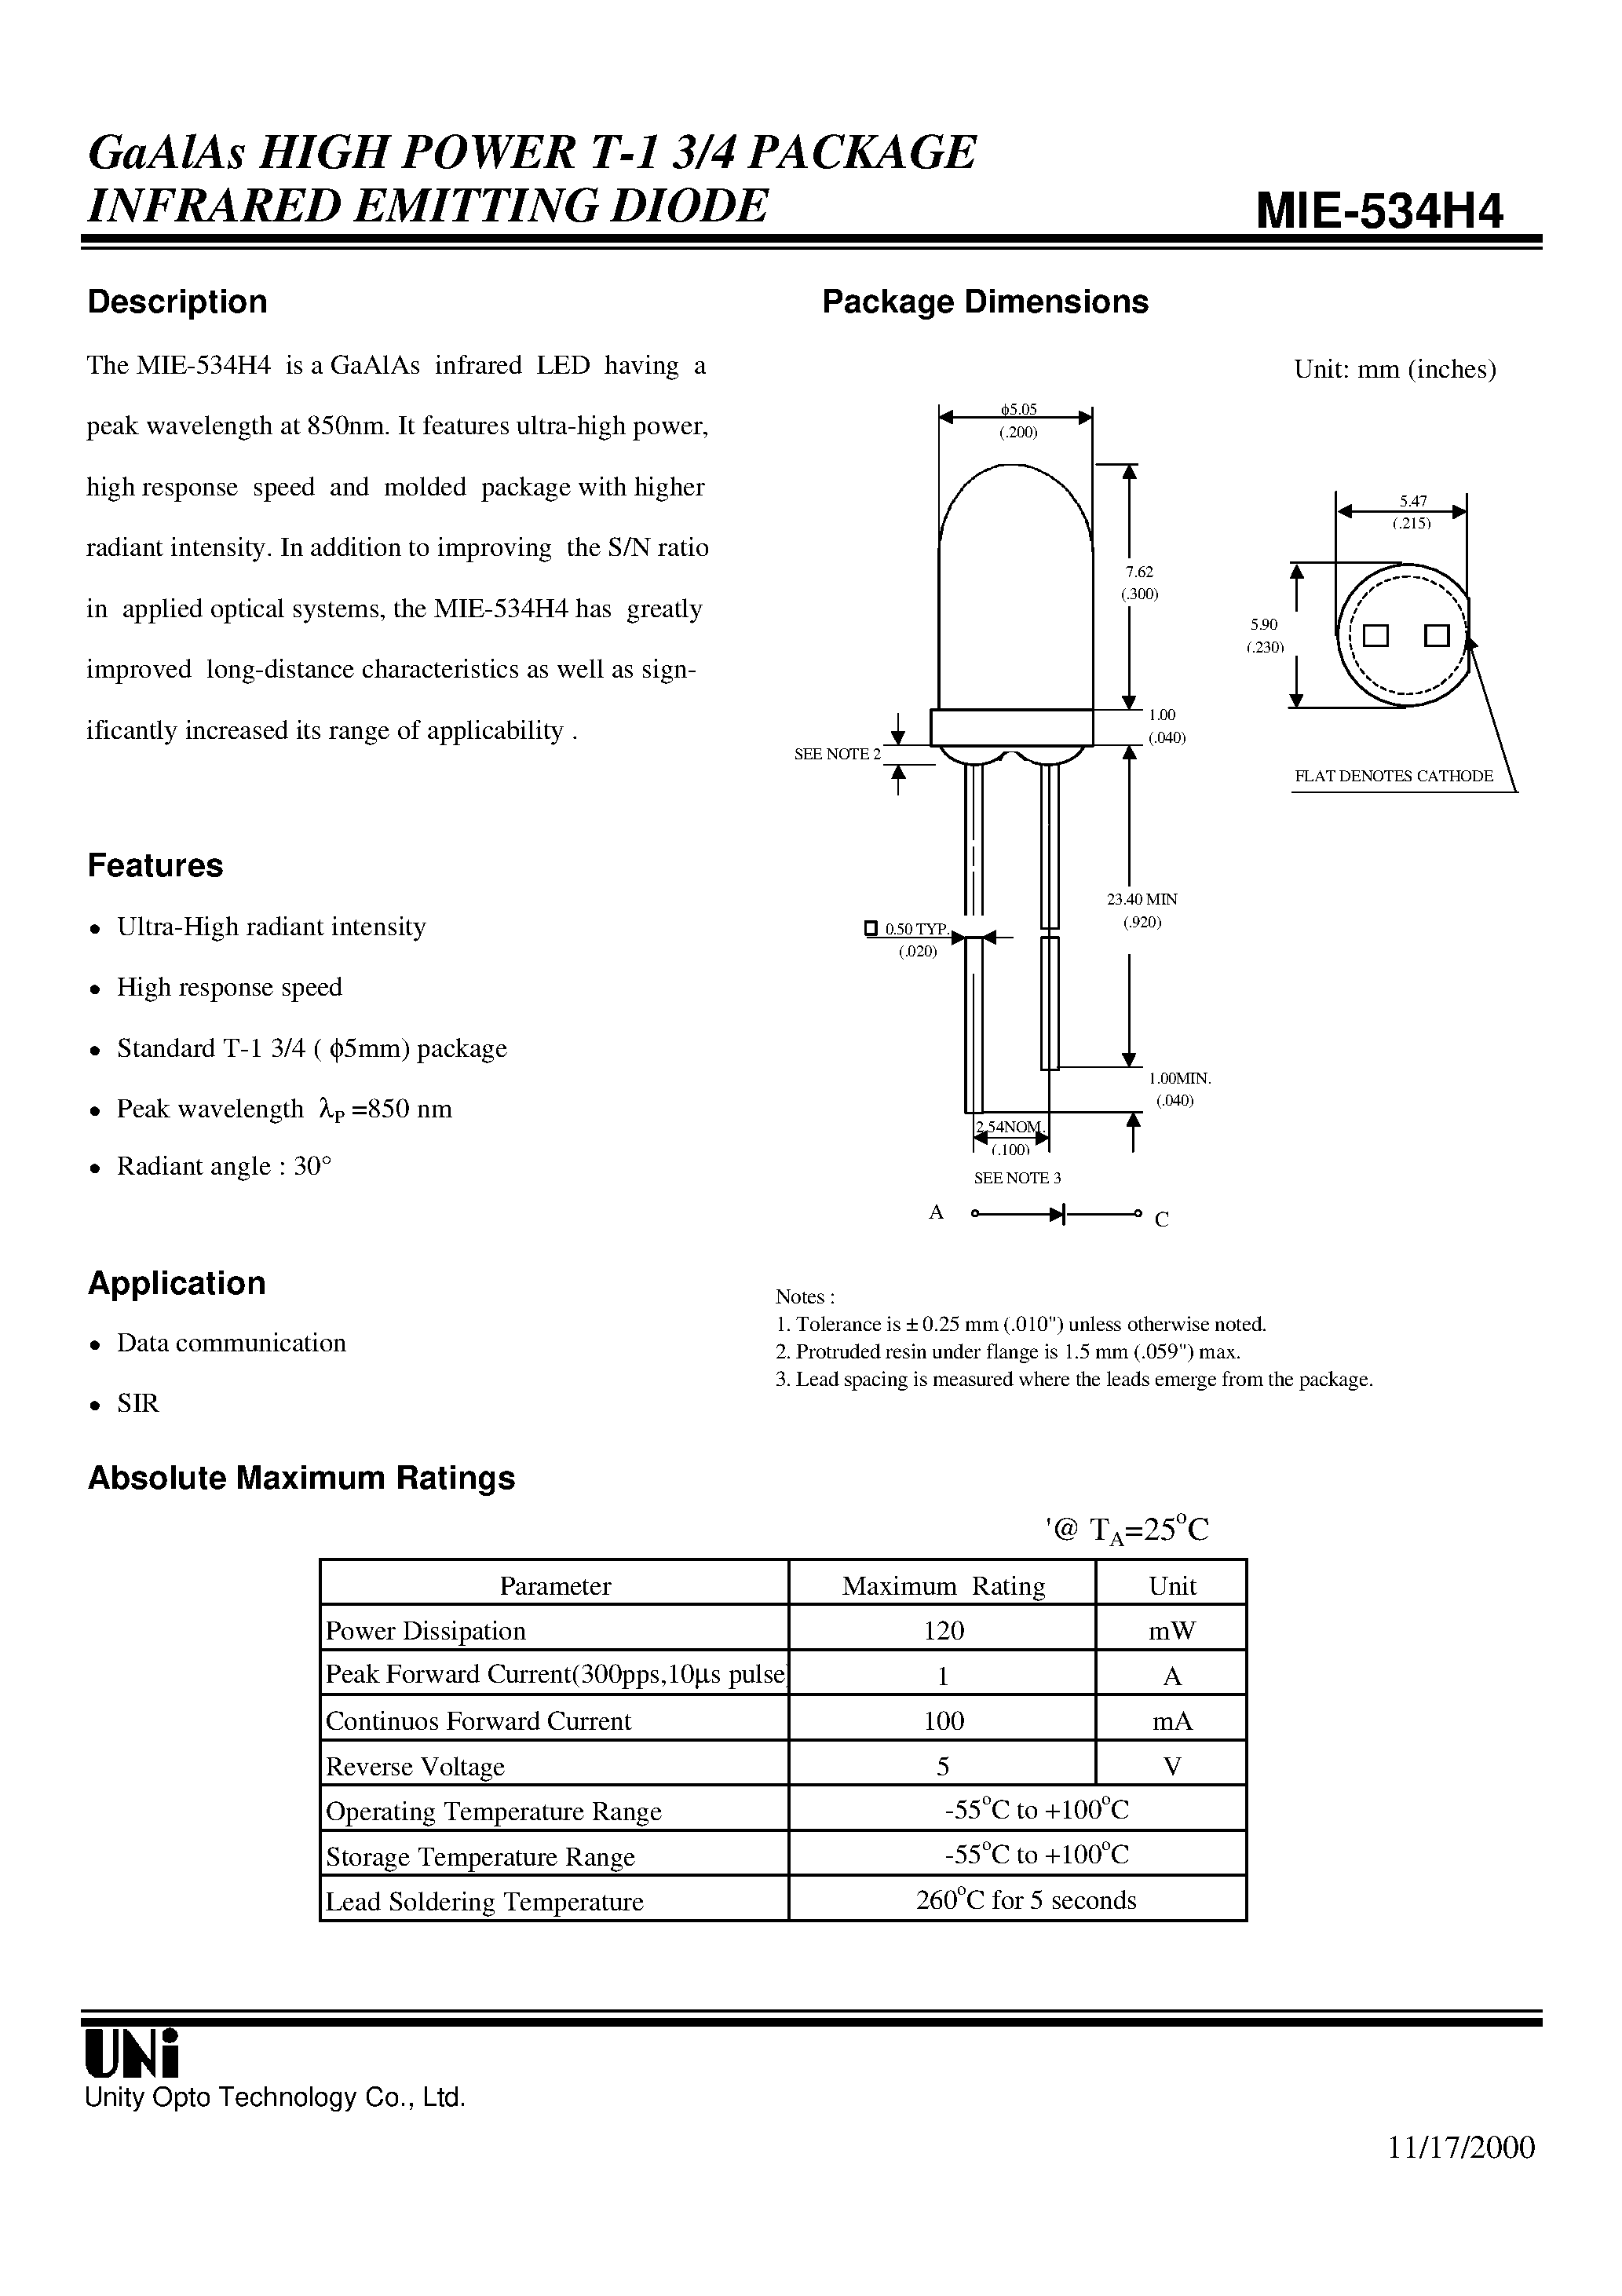 Datasheet MIE-534H4 - GaAlAs HIGH POWER T-1 3/4 PACKAGE INFRARED EMITTING DIODE page 1